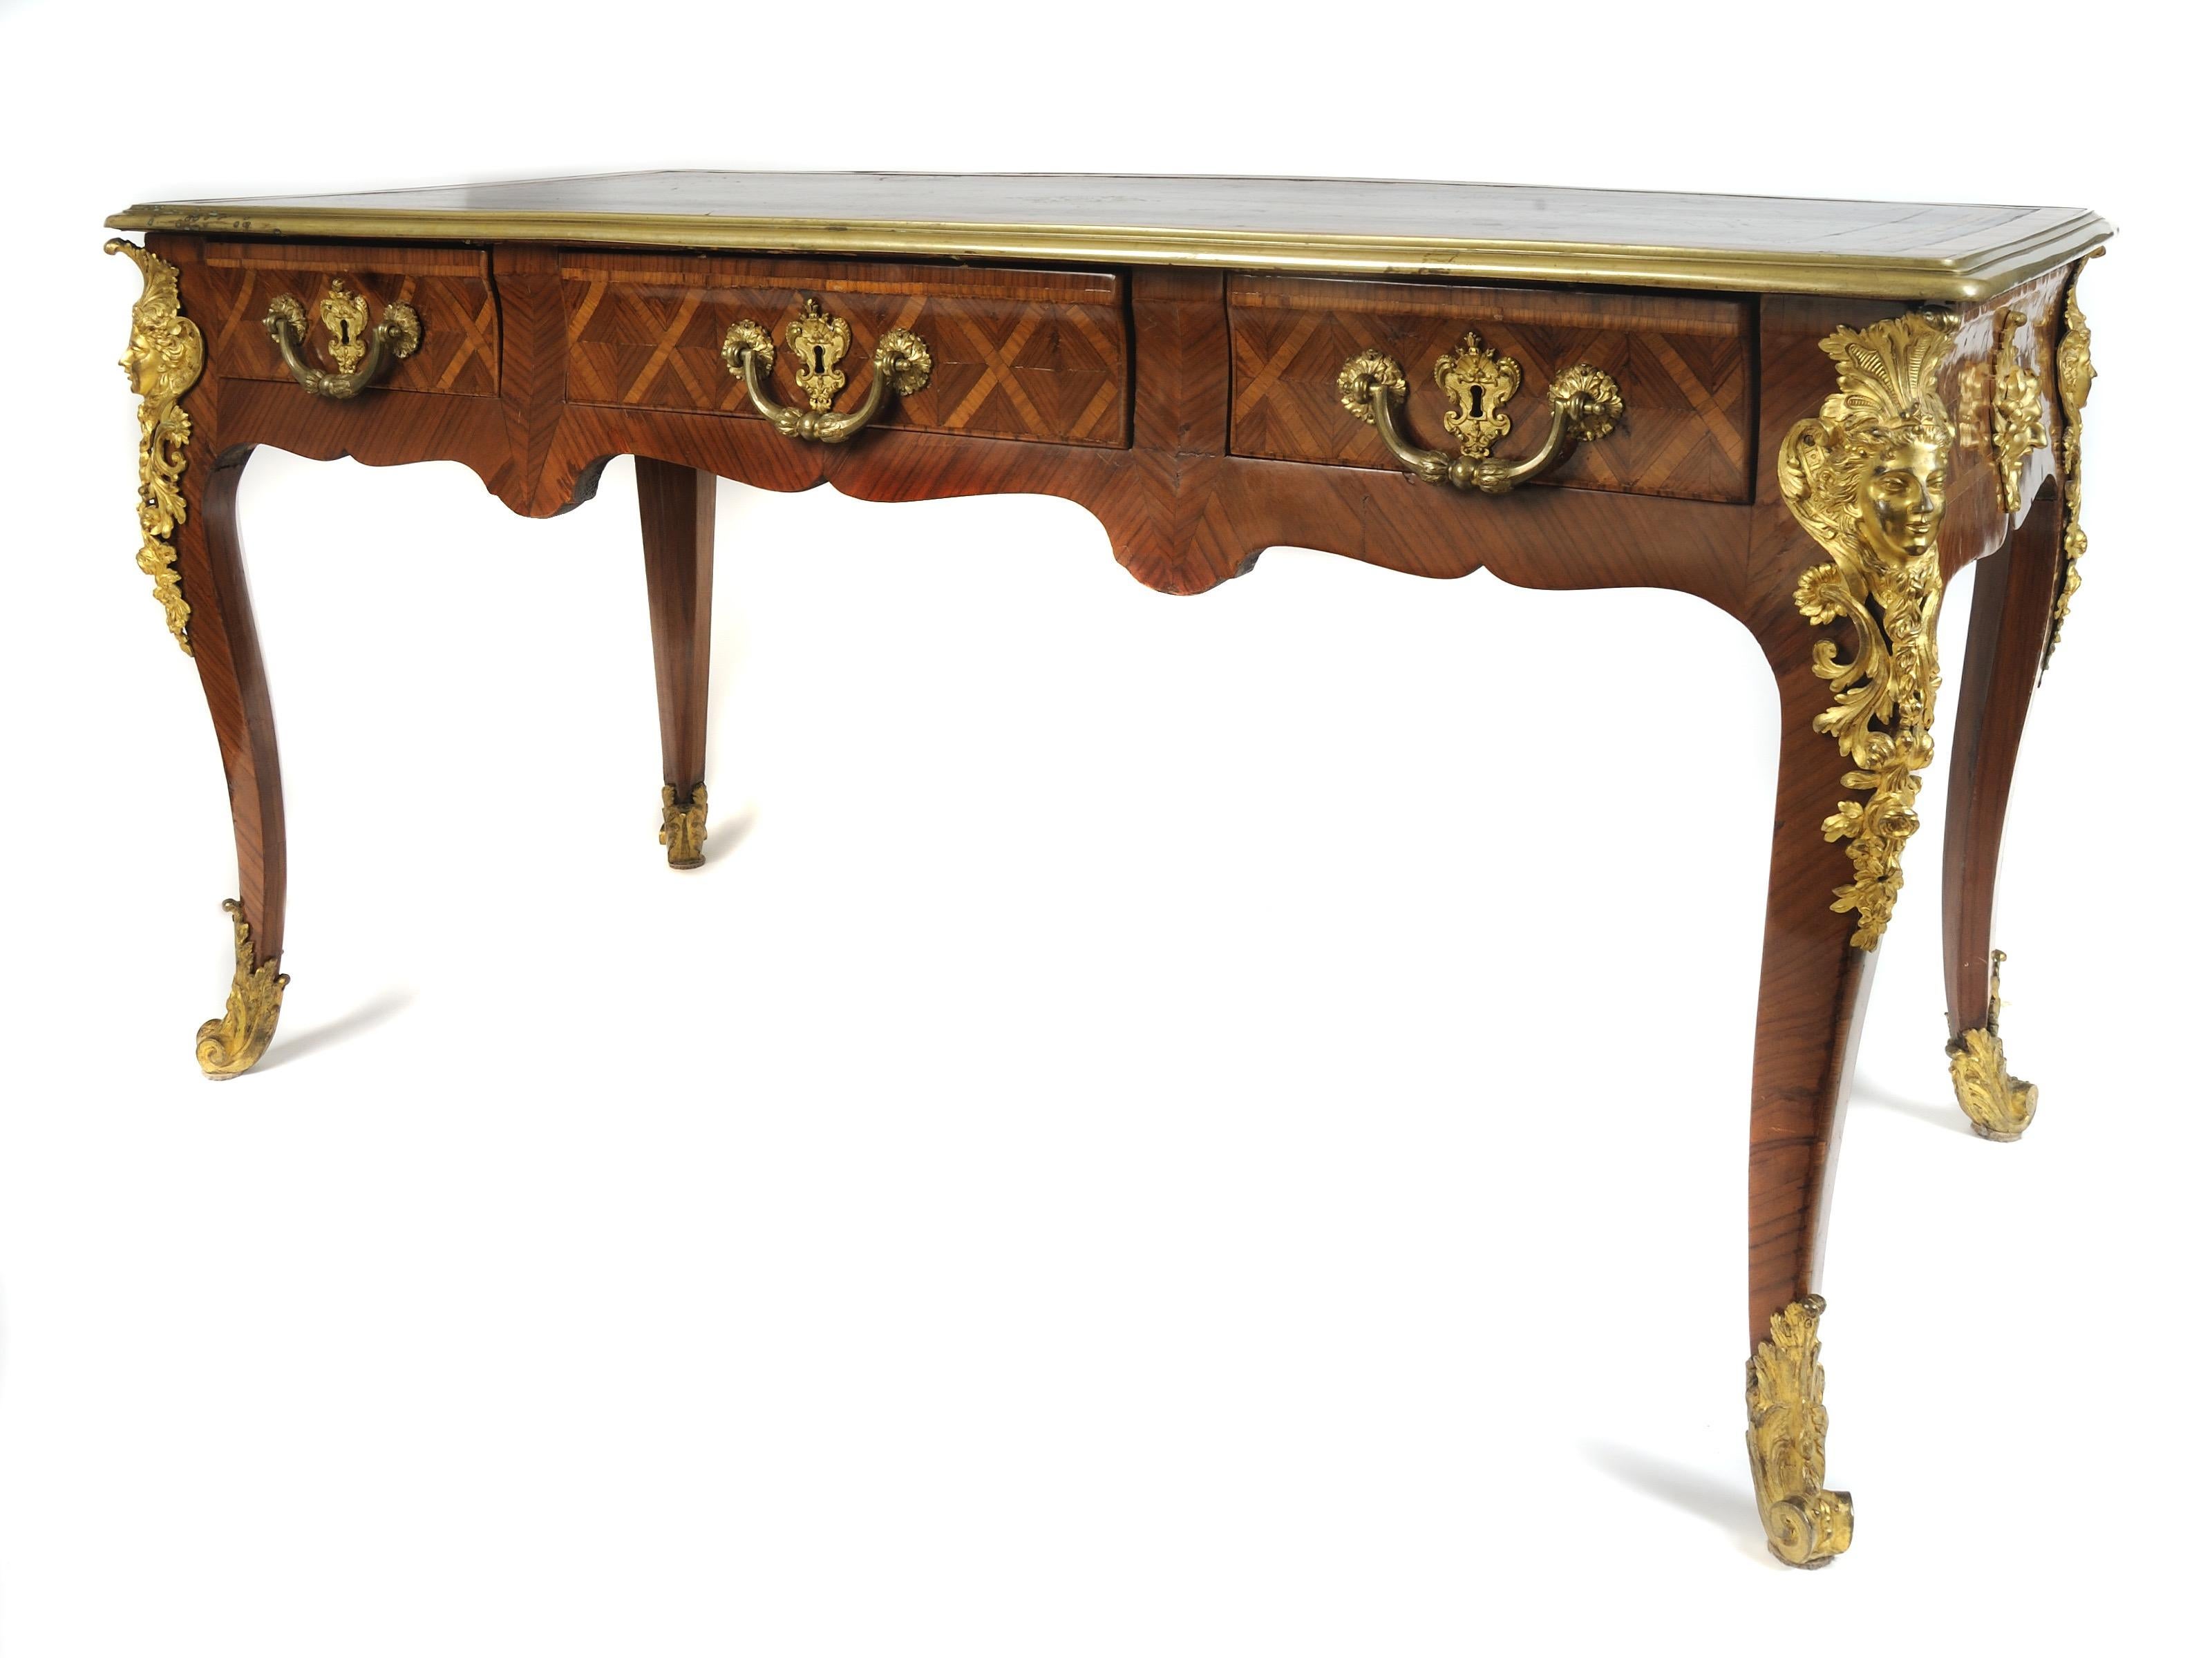 18th century three-drawer French gilt-embellished bureau-plat, circa 1725
Attributed to Noel Gerard (French 1690-1786)
Tulipwood with kingwood inlays and gilt bronze appliques
Measures: 30.5